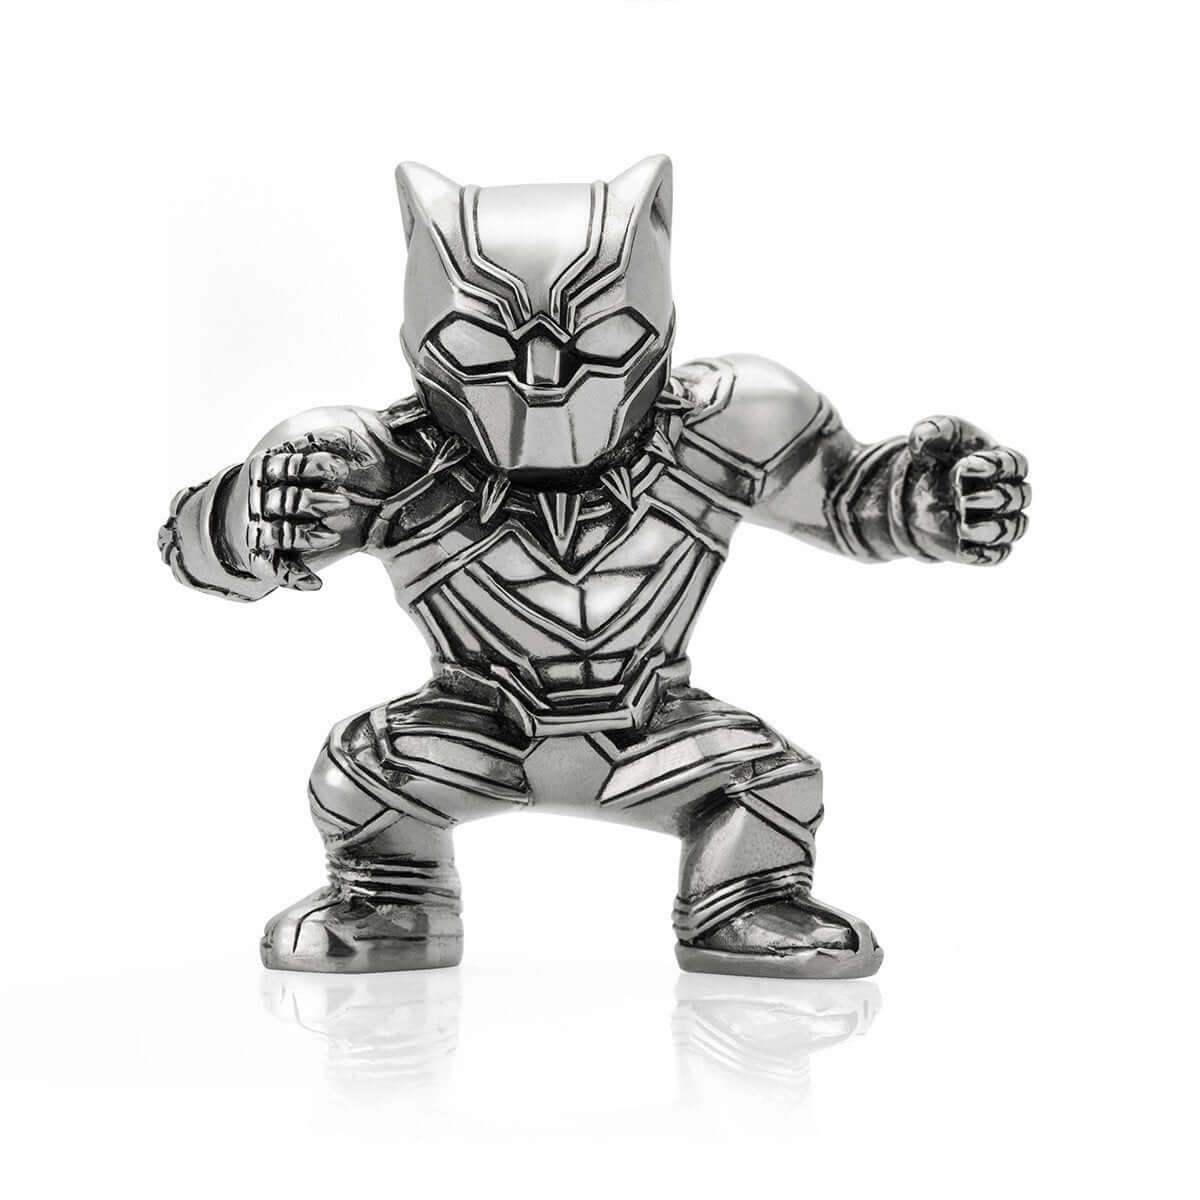 Black Panther Miniature Figurine - Marvel Collectible gift